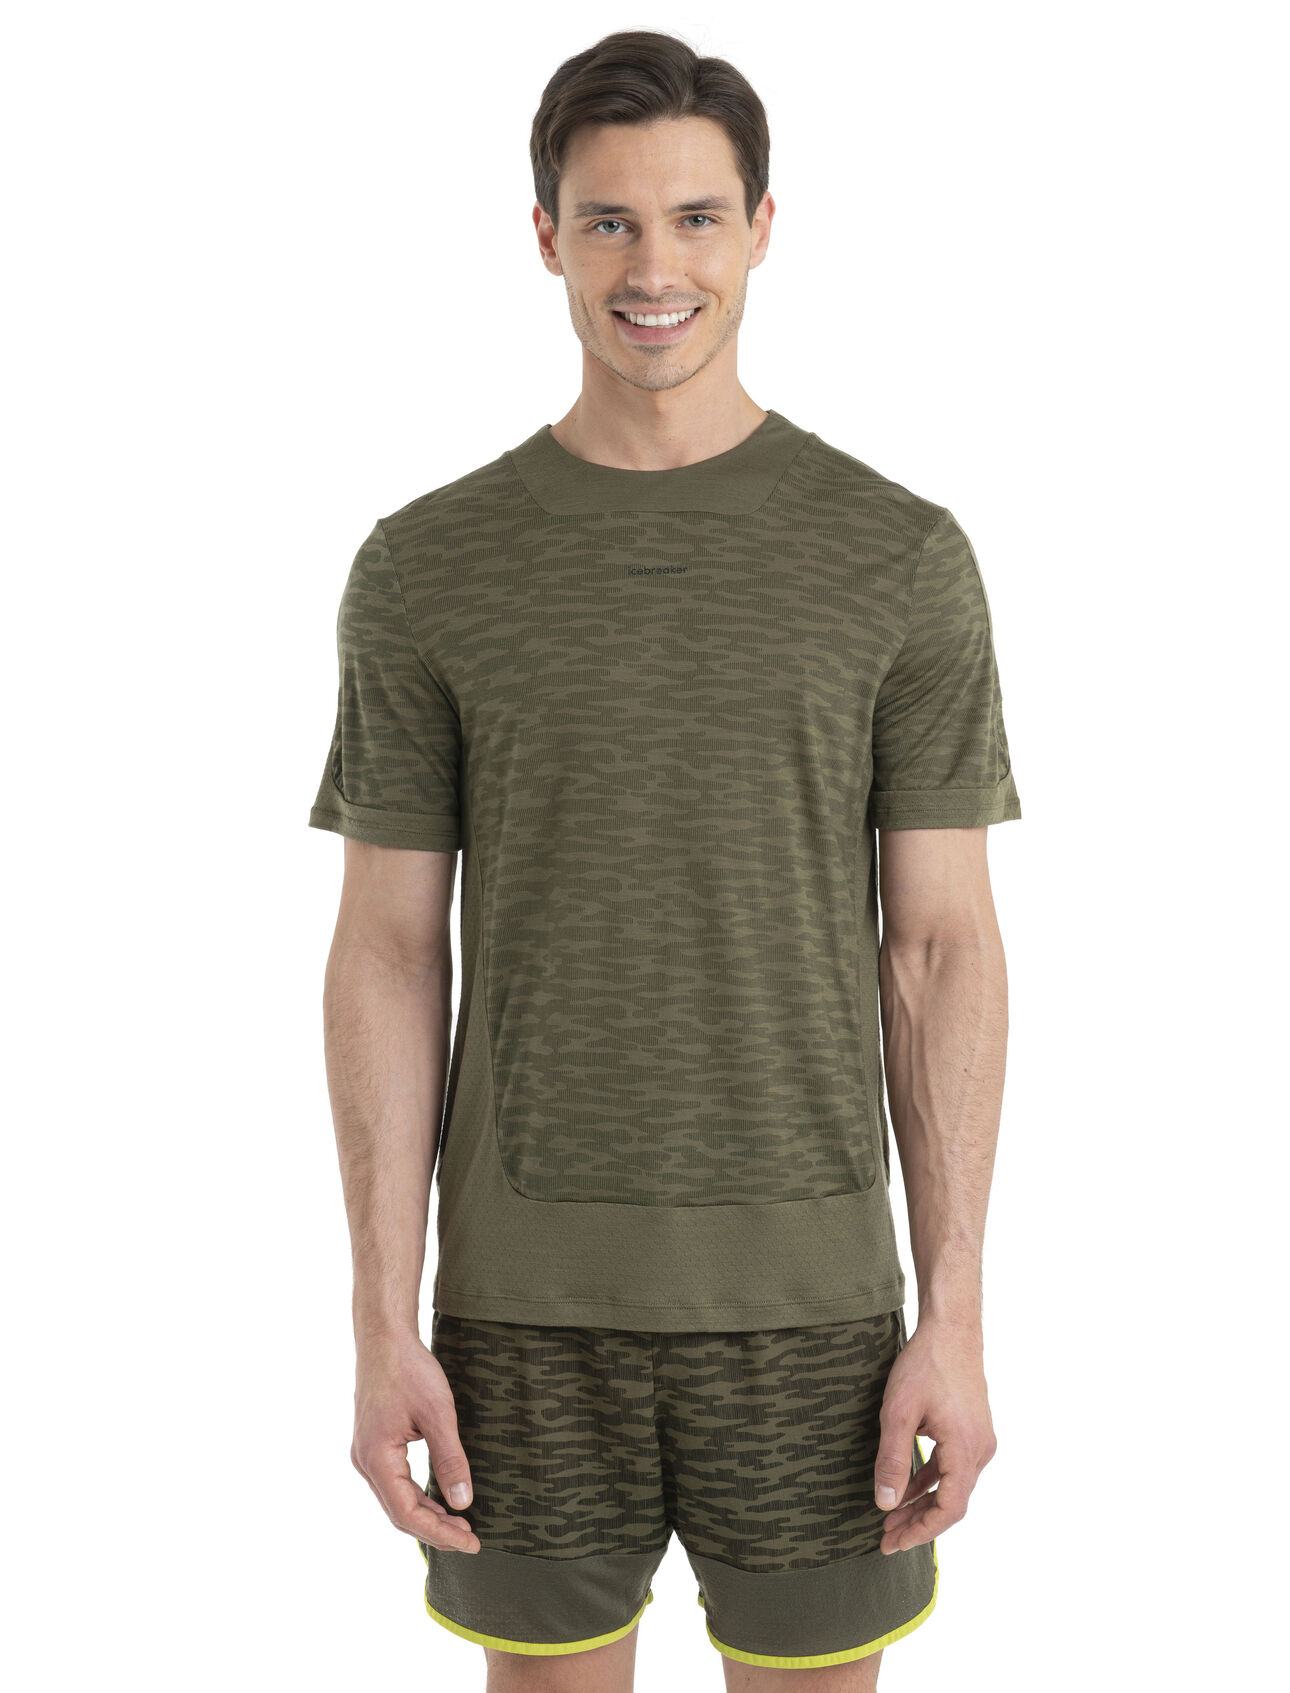 Mens 125 ZoneKnit™ Merino Short Sleeve T-Shirt IB Topo Our most breathable and lightweight tee designed for running, biking and other high exertion pursuits, the 125 ZoneKnit™ Short Sleeve Tee IB Topo combines our Cool-Lite™ jersey fabric with strategic panels of eyelet mesh for enhanced airflow. The natural camo print adds a high-performance feel.